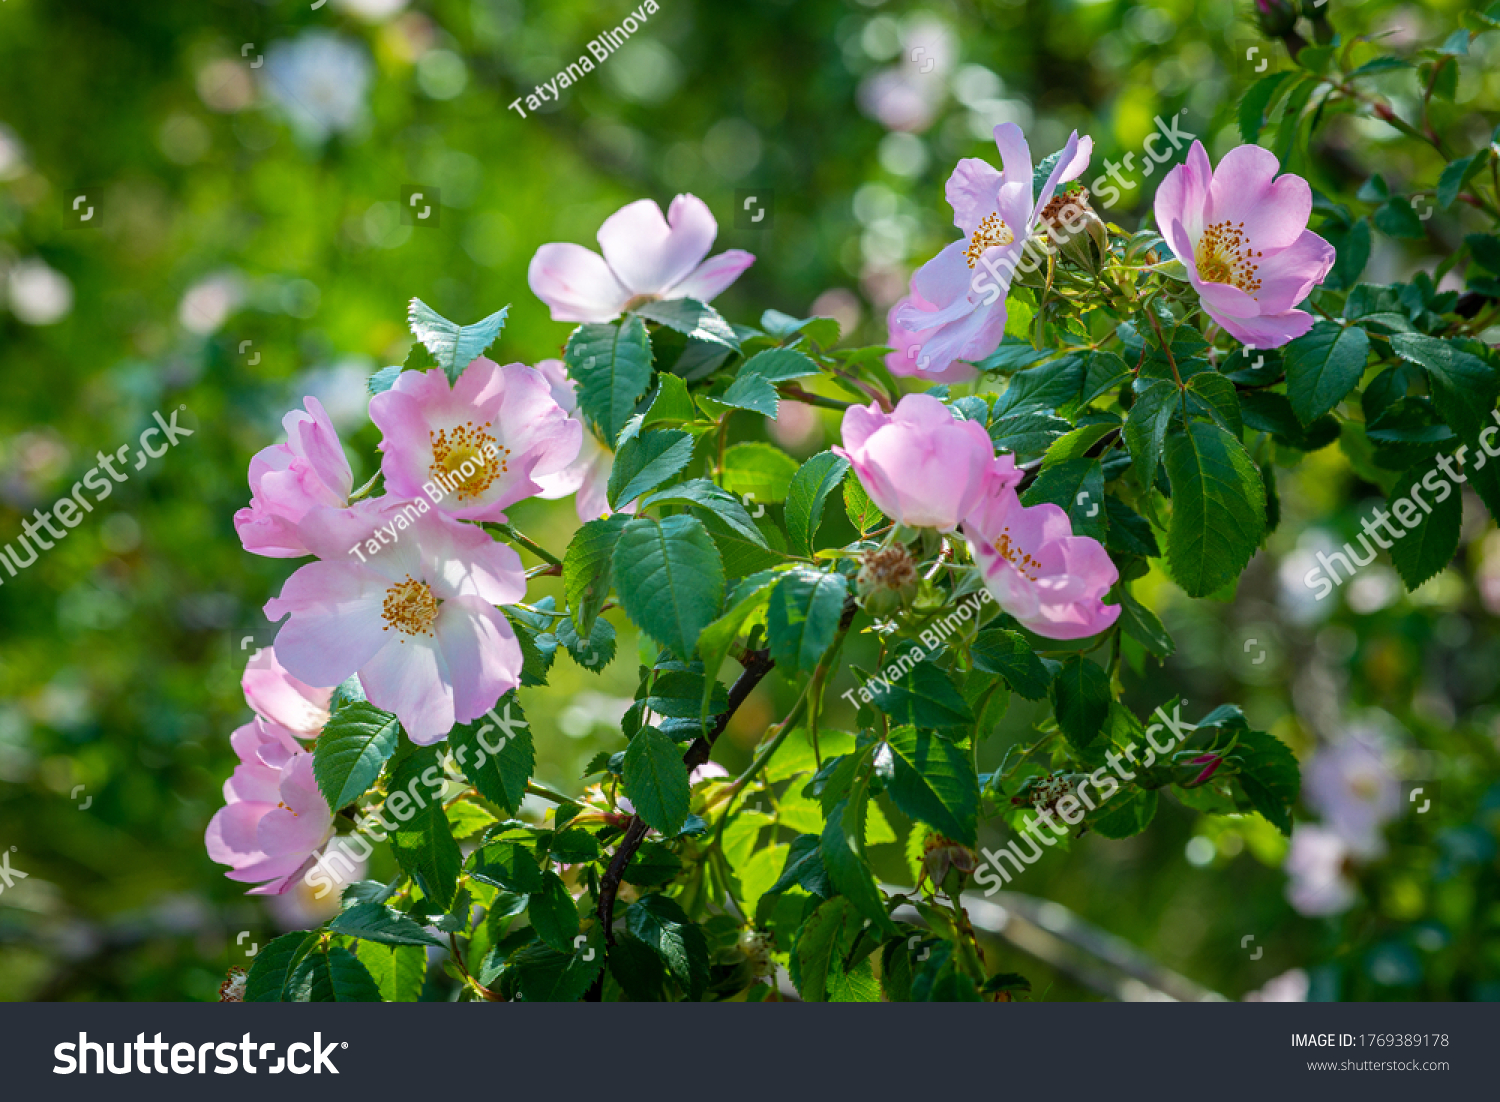 Blooming wild rose Bush. Beautiful pink flowers in the summer forest. Useful medicinal plant for decoction of tea for health #1769389178